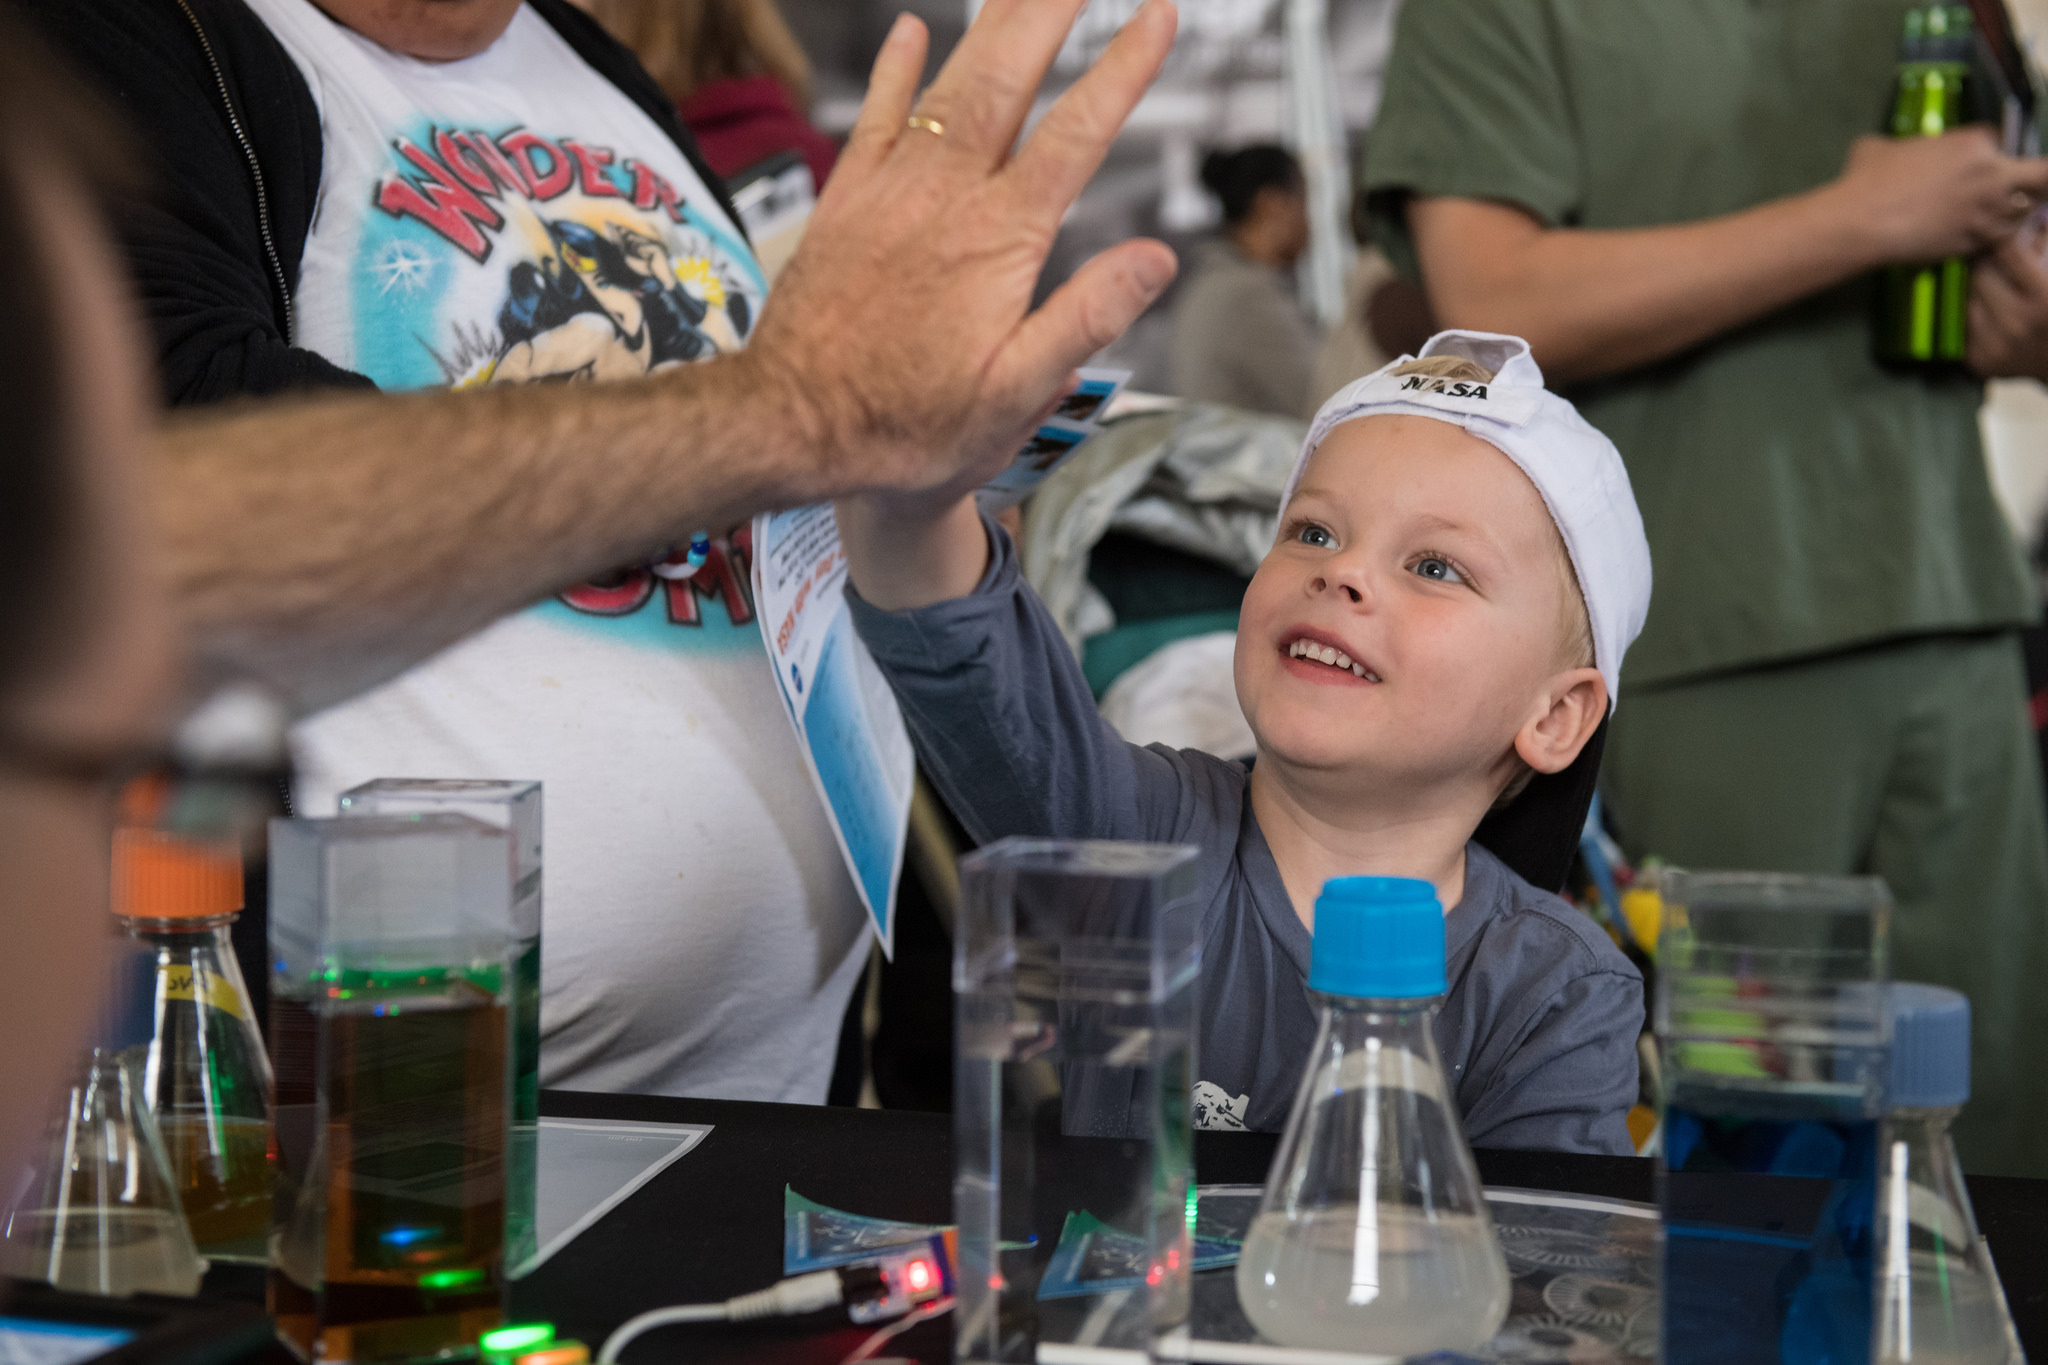 A visitor gives a high five after learning about phytoplankton at the PACE table at the Earth Day event at Union Station in Washington, D.C.